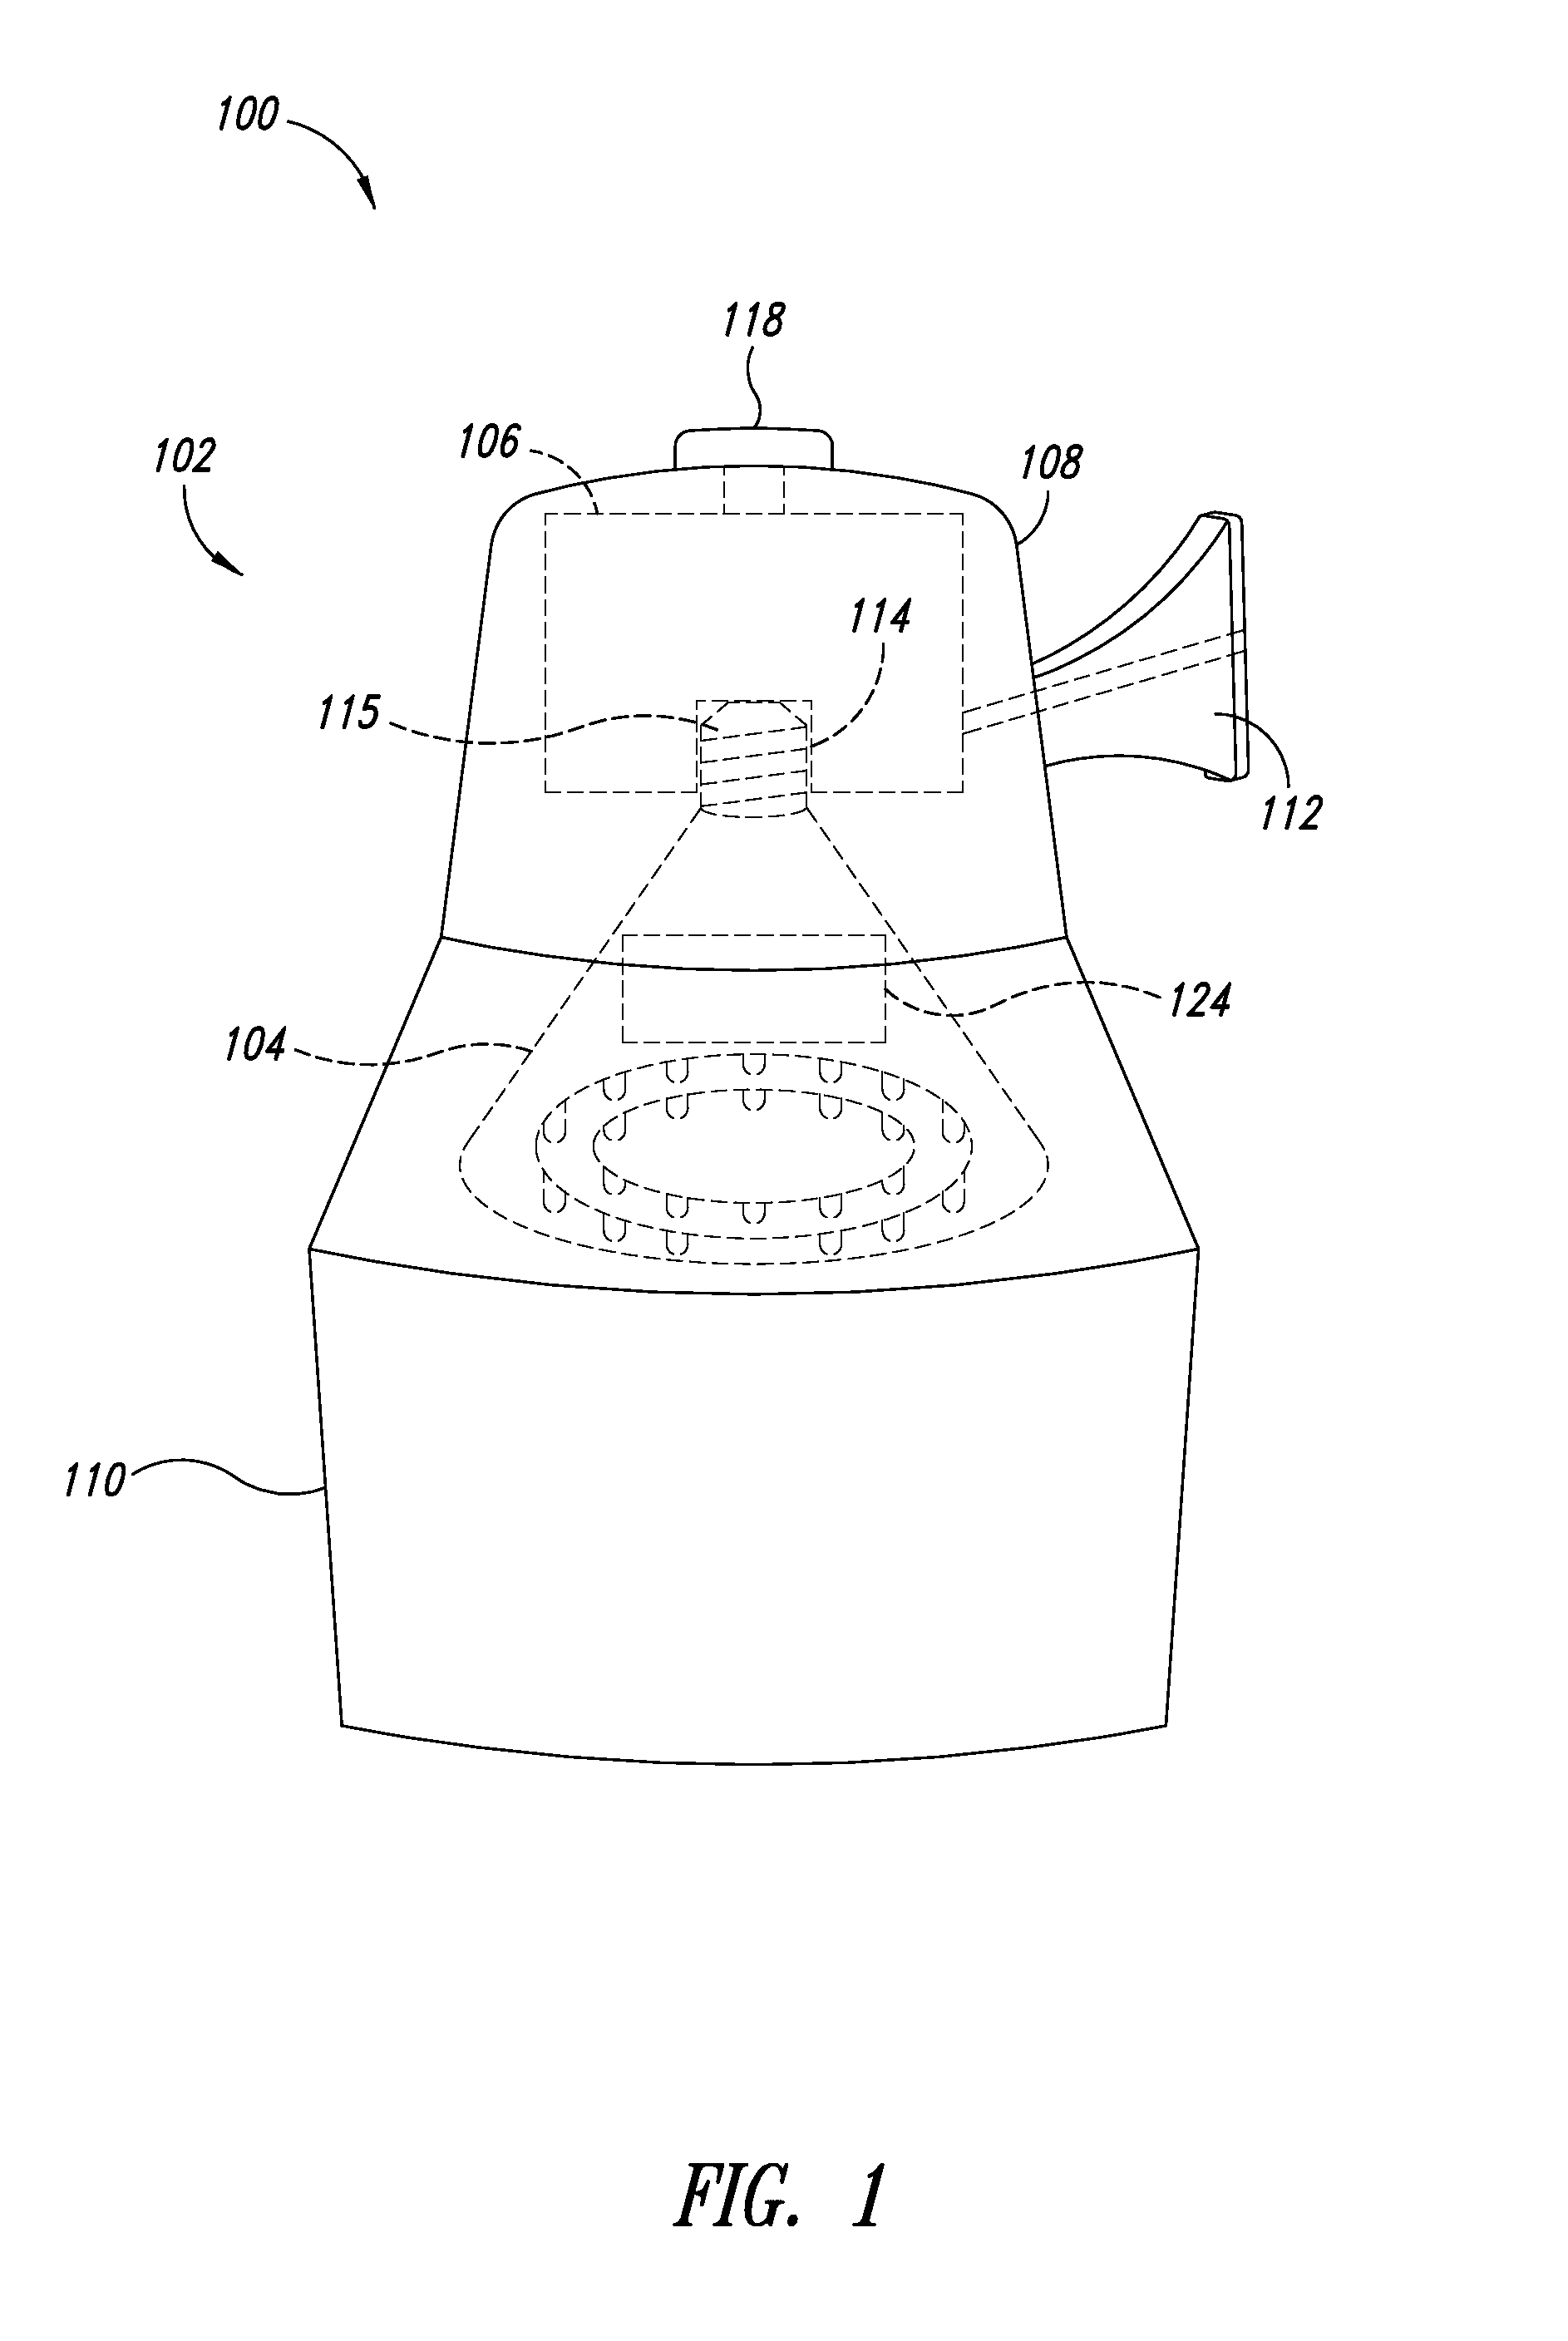 Apparatus and method of operating a luminaire